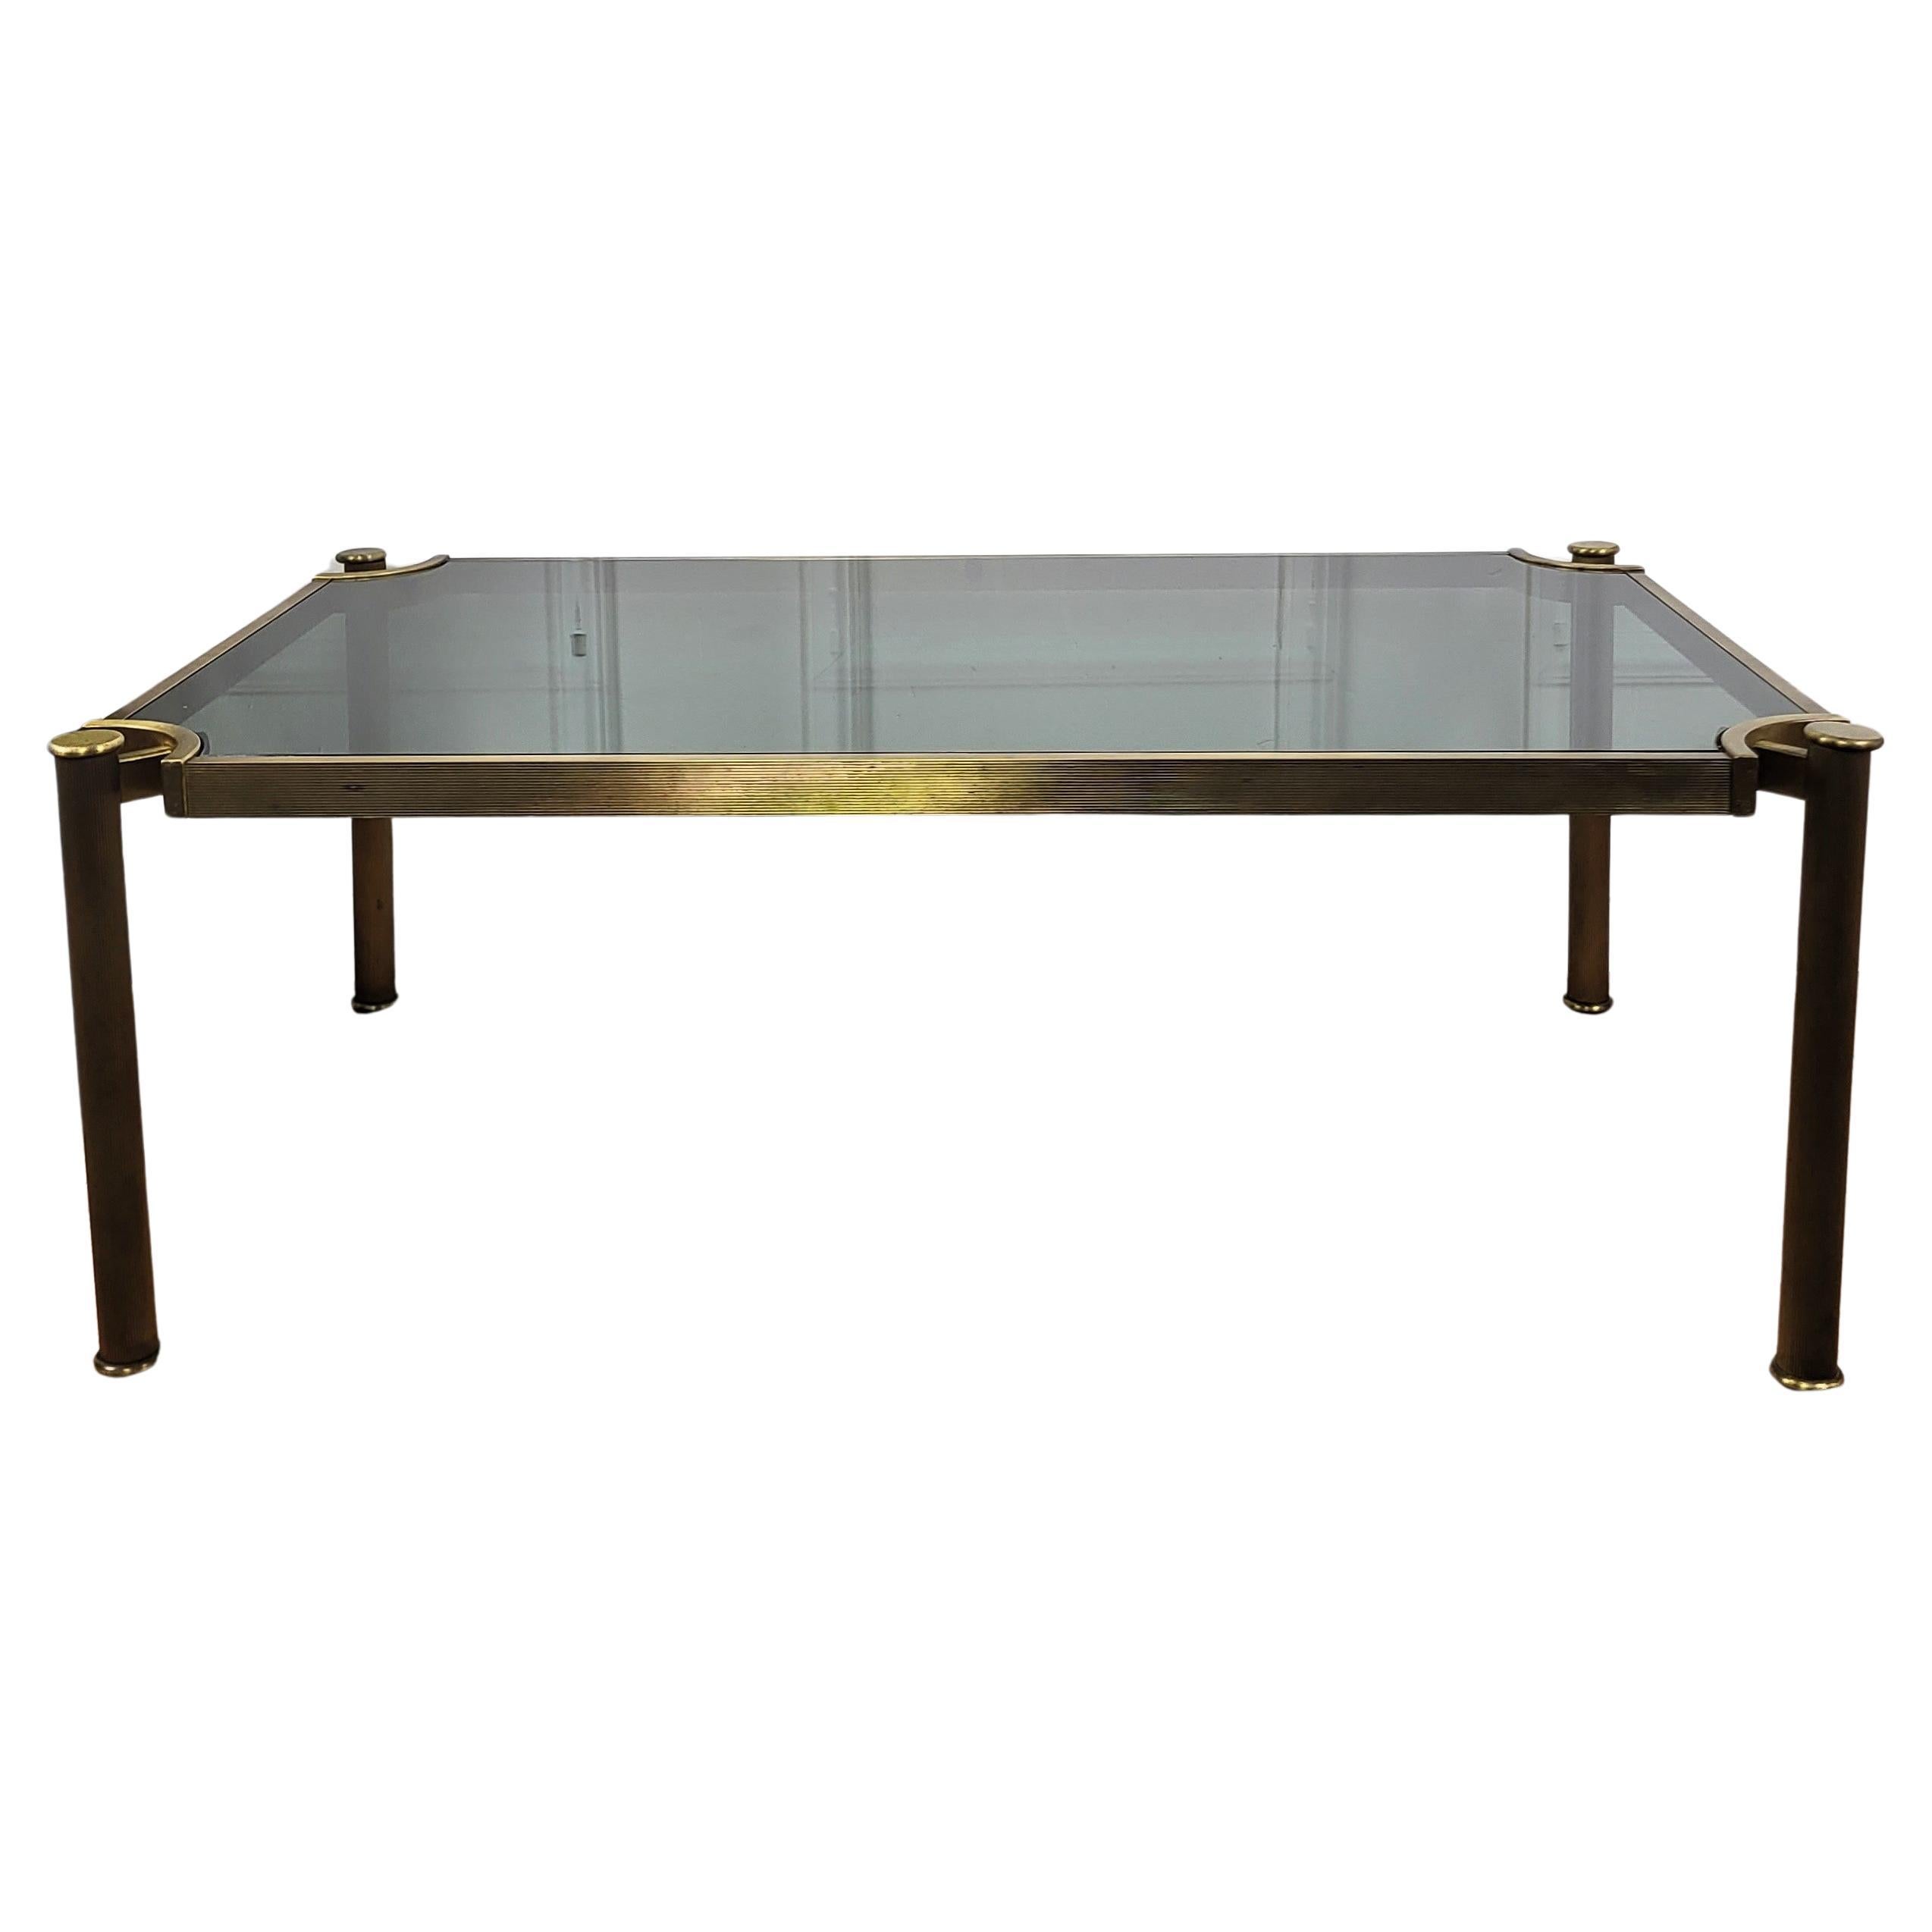 1980s Italian Mid-Century Regency Neoclassical Brass Smoked Glass Coffee Table For Sale